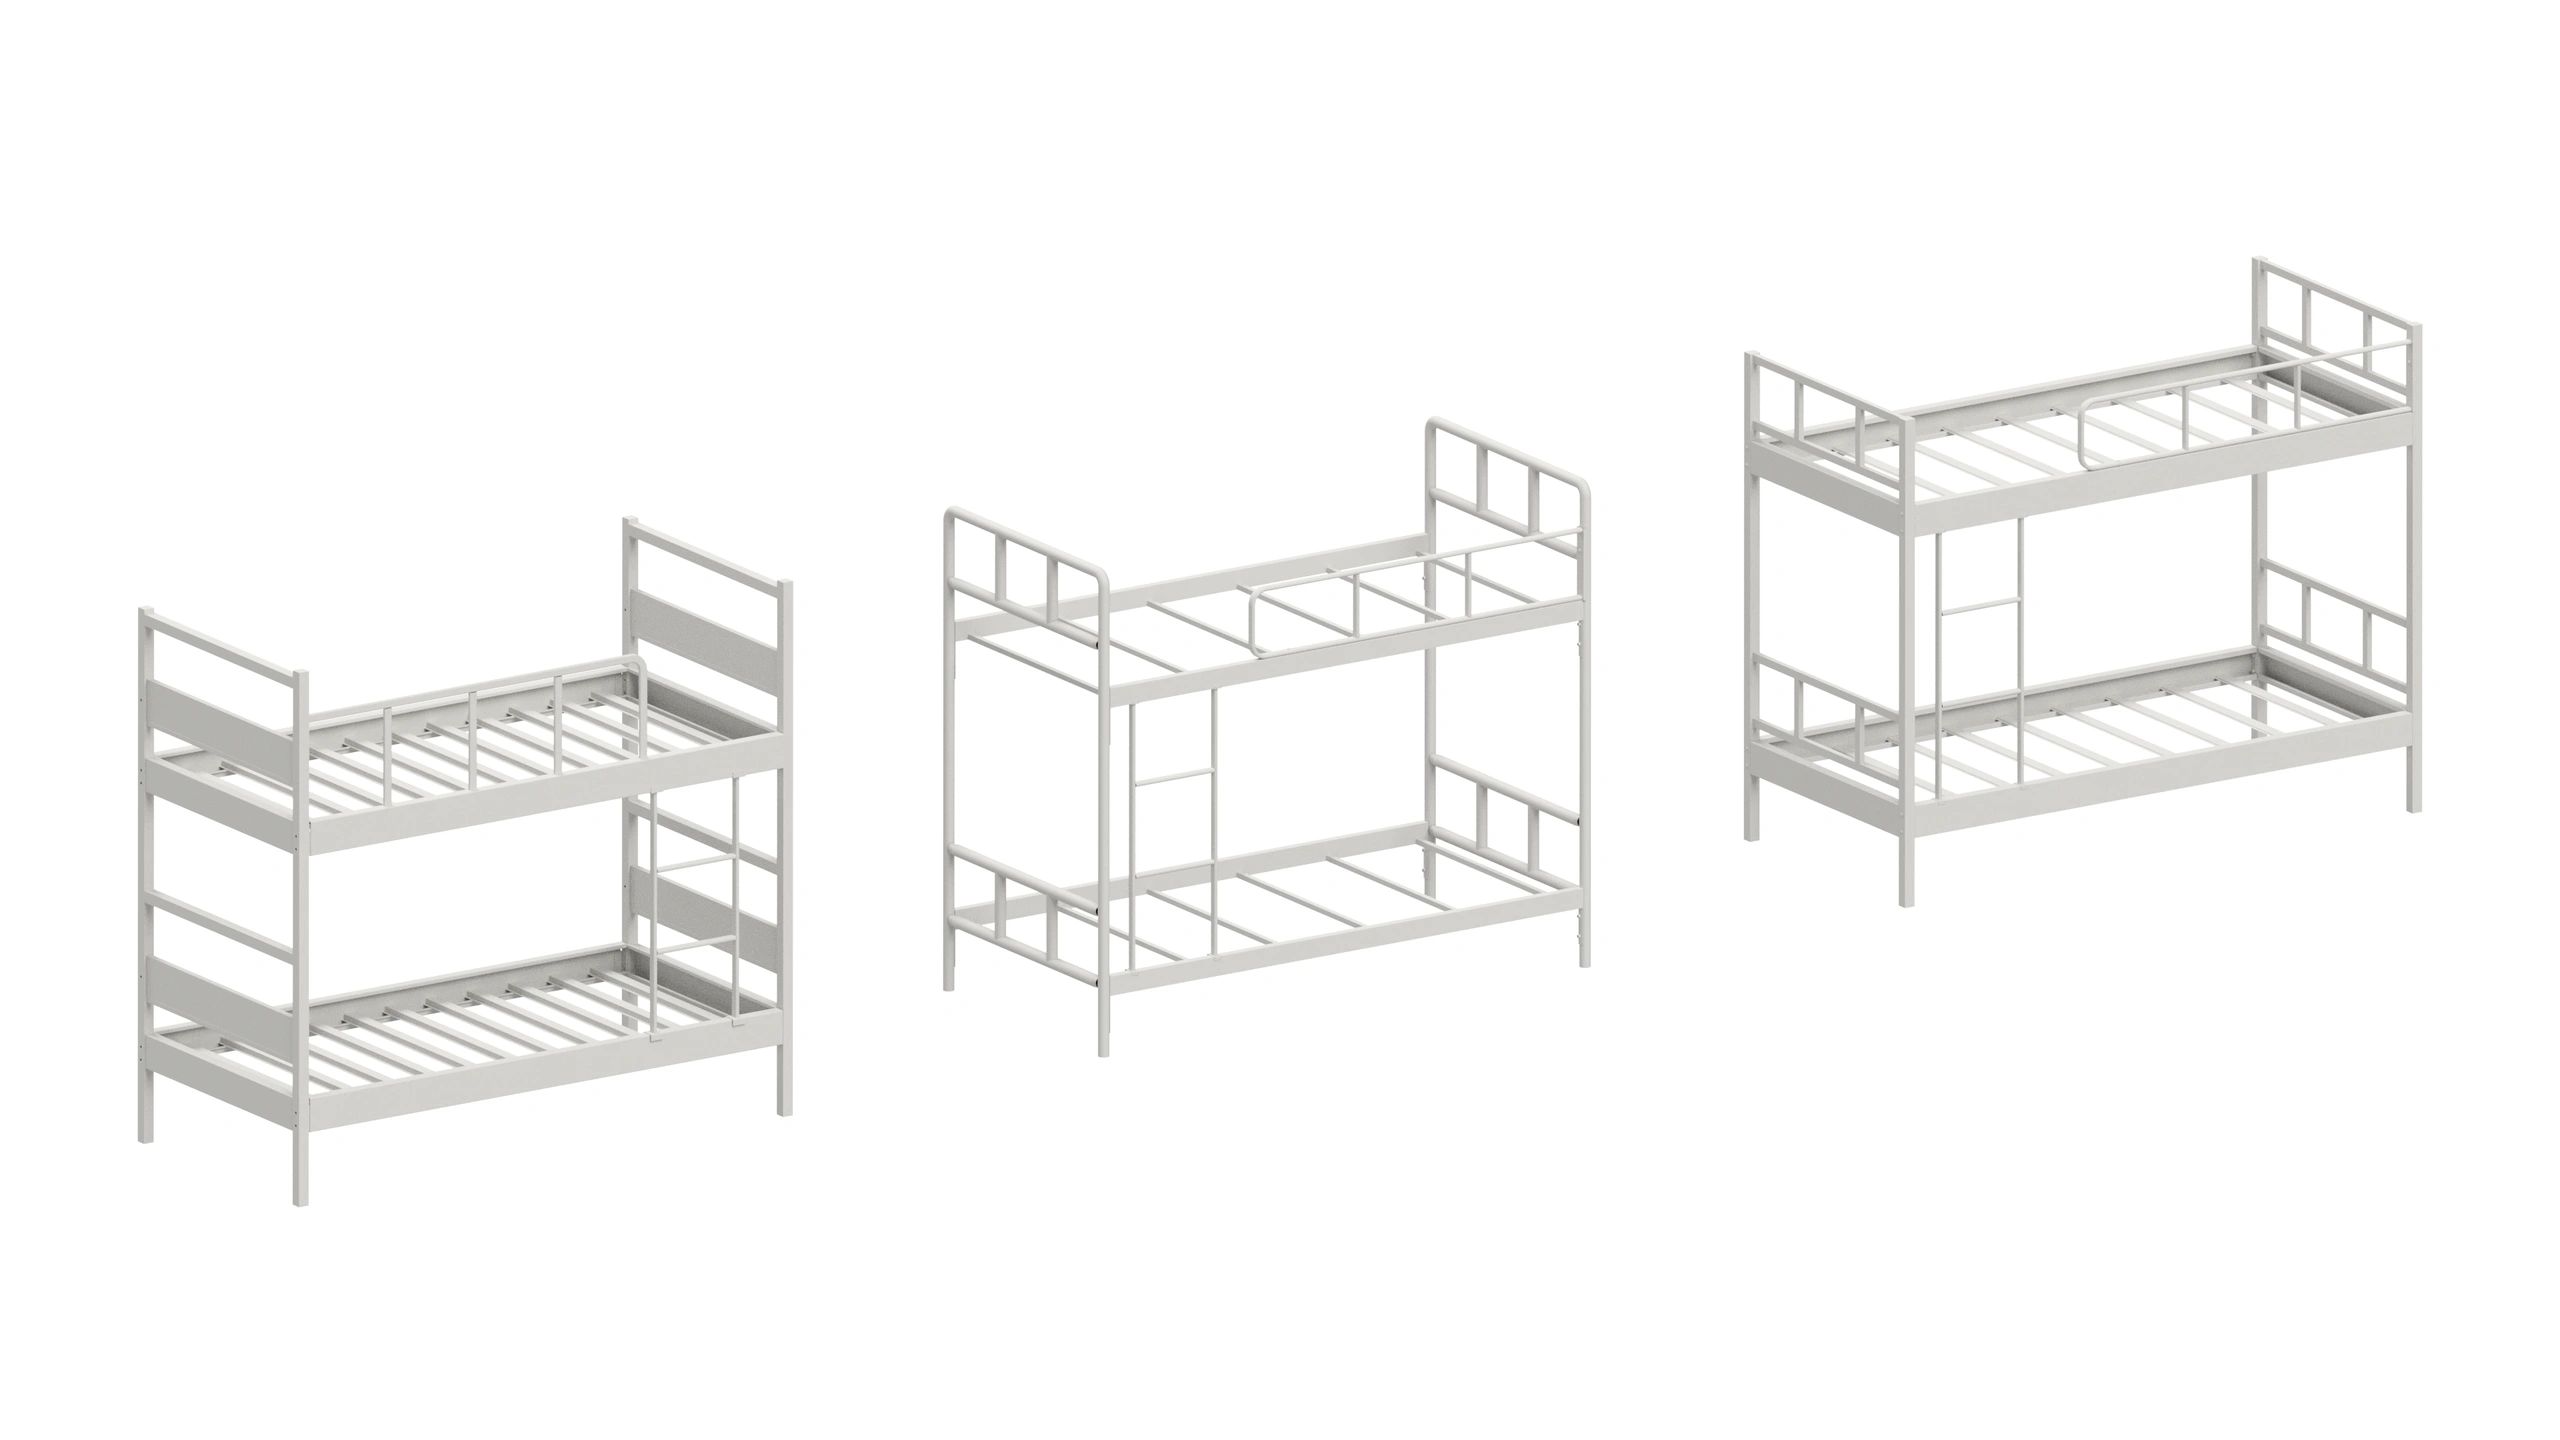 bunk beds, metal beds, turkey beds, soldiers beds, hospital beds, wooden bunk beds, double beds, sin